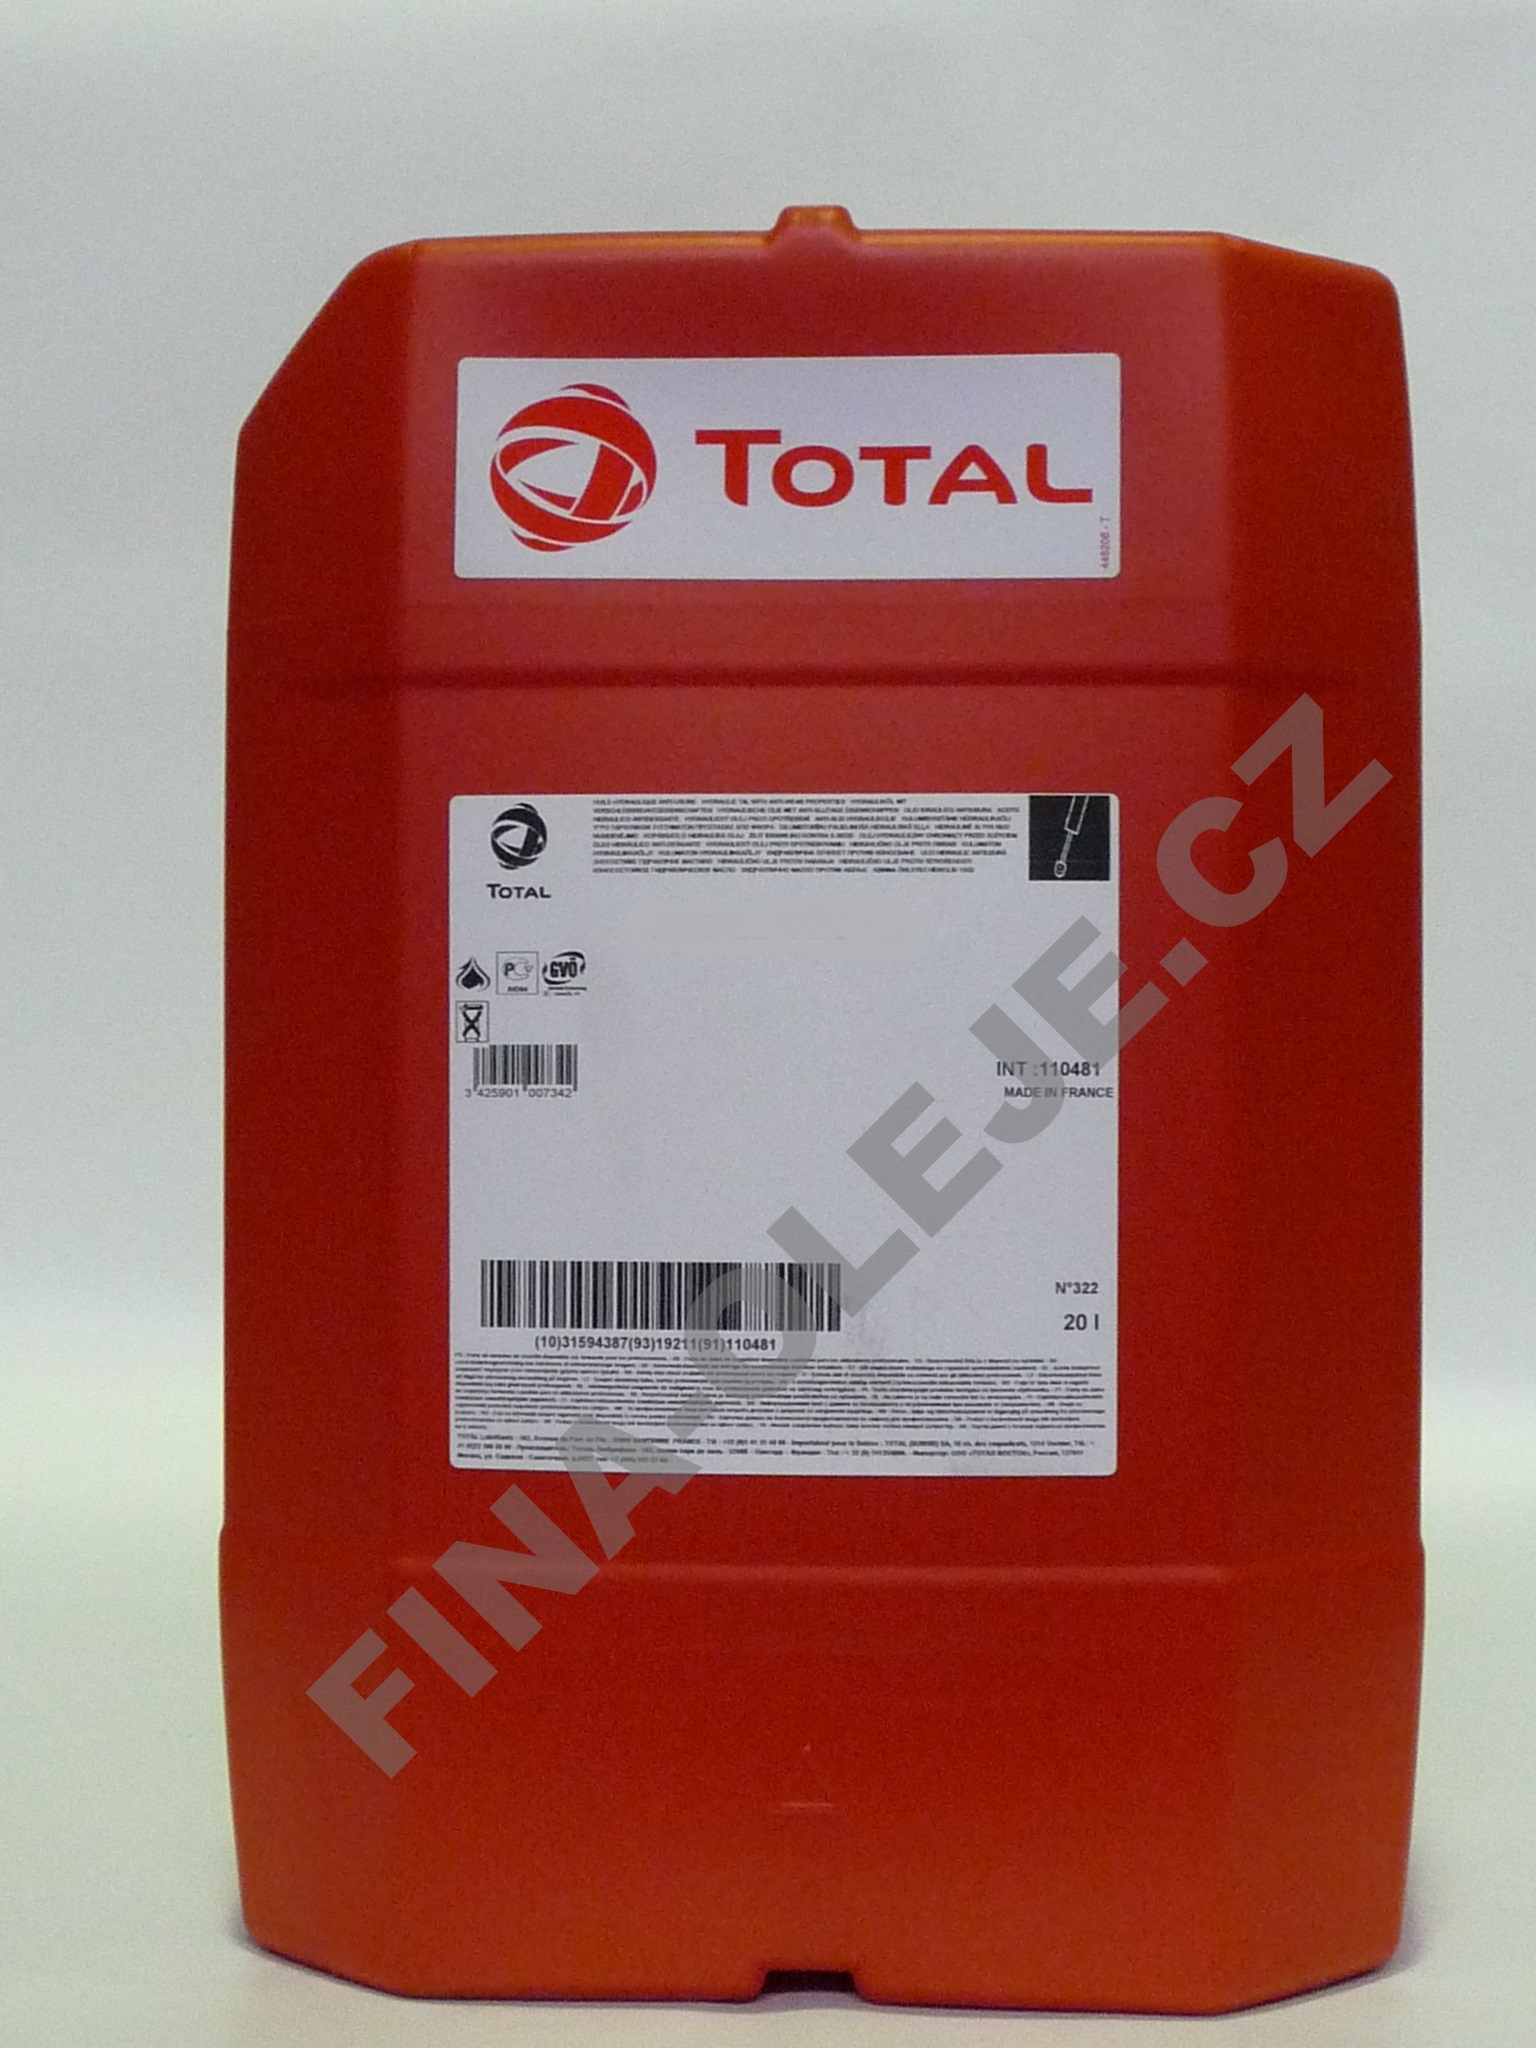 TOTAL CARTER SY 220 - 20 L